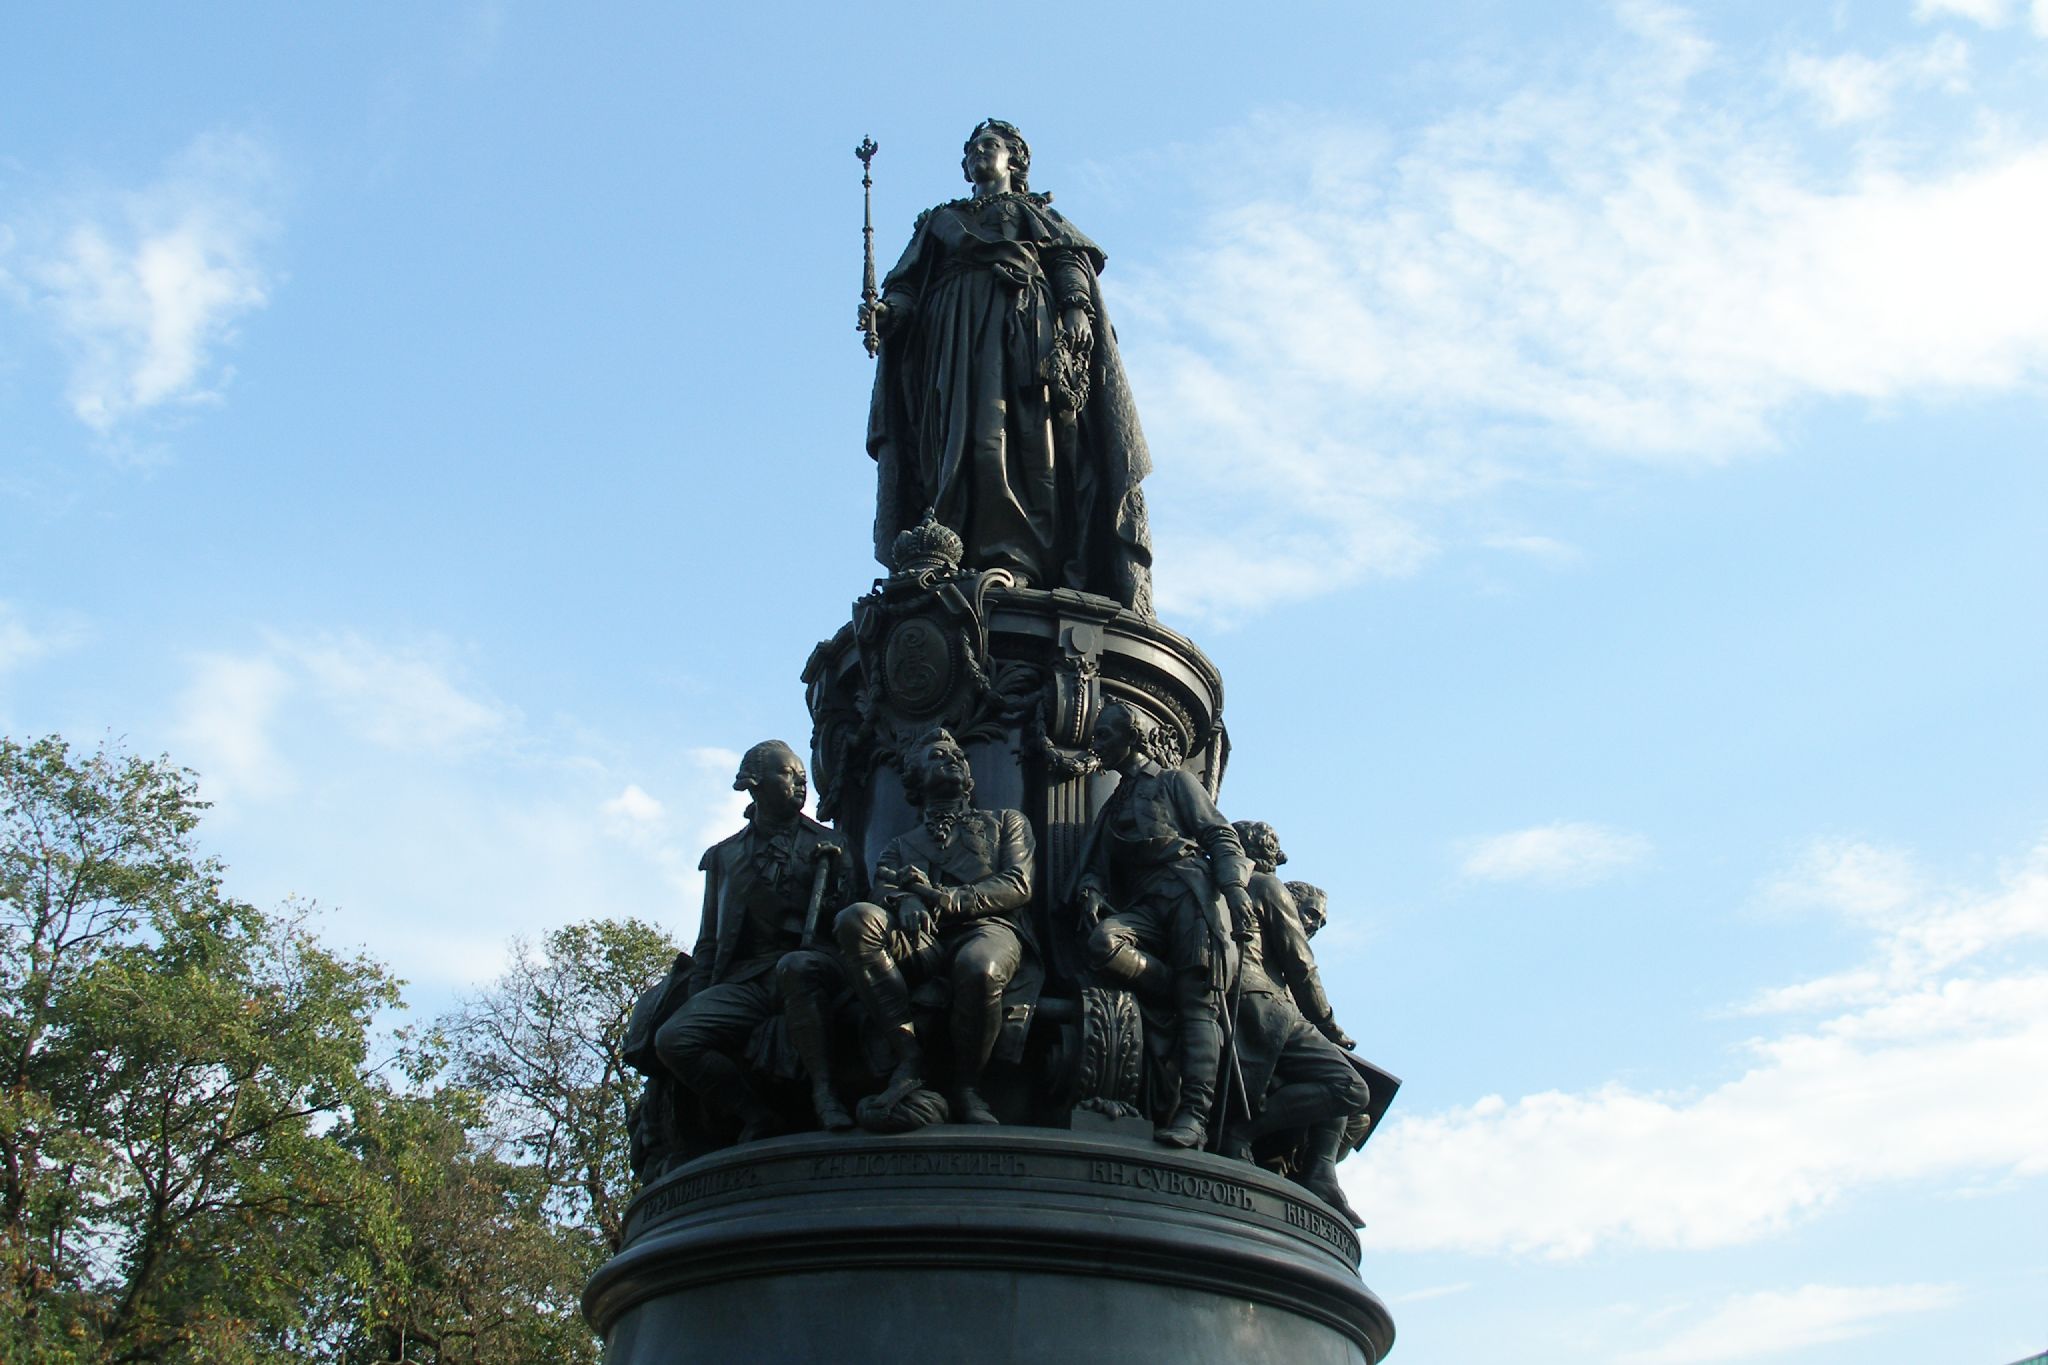 the statue is located on top of the column